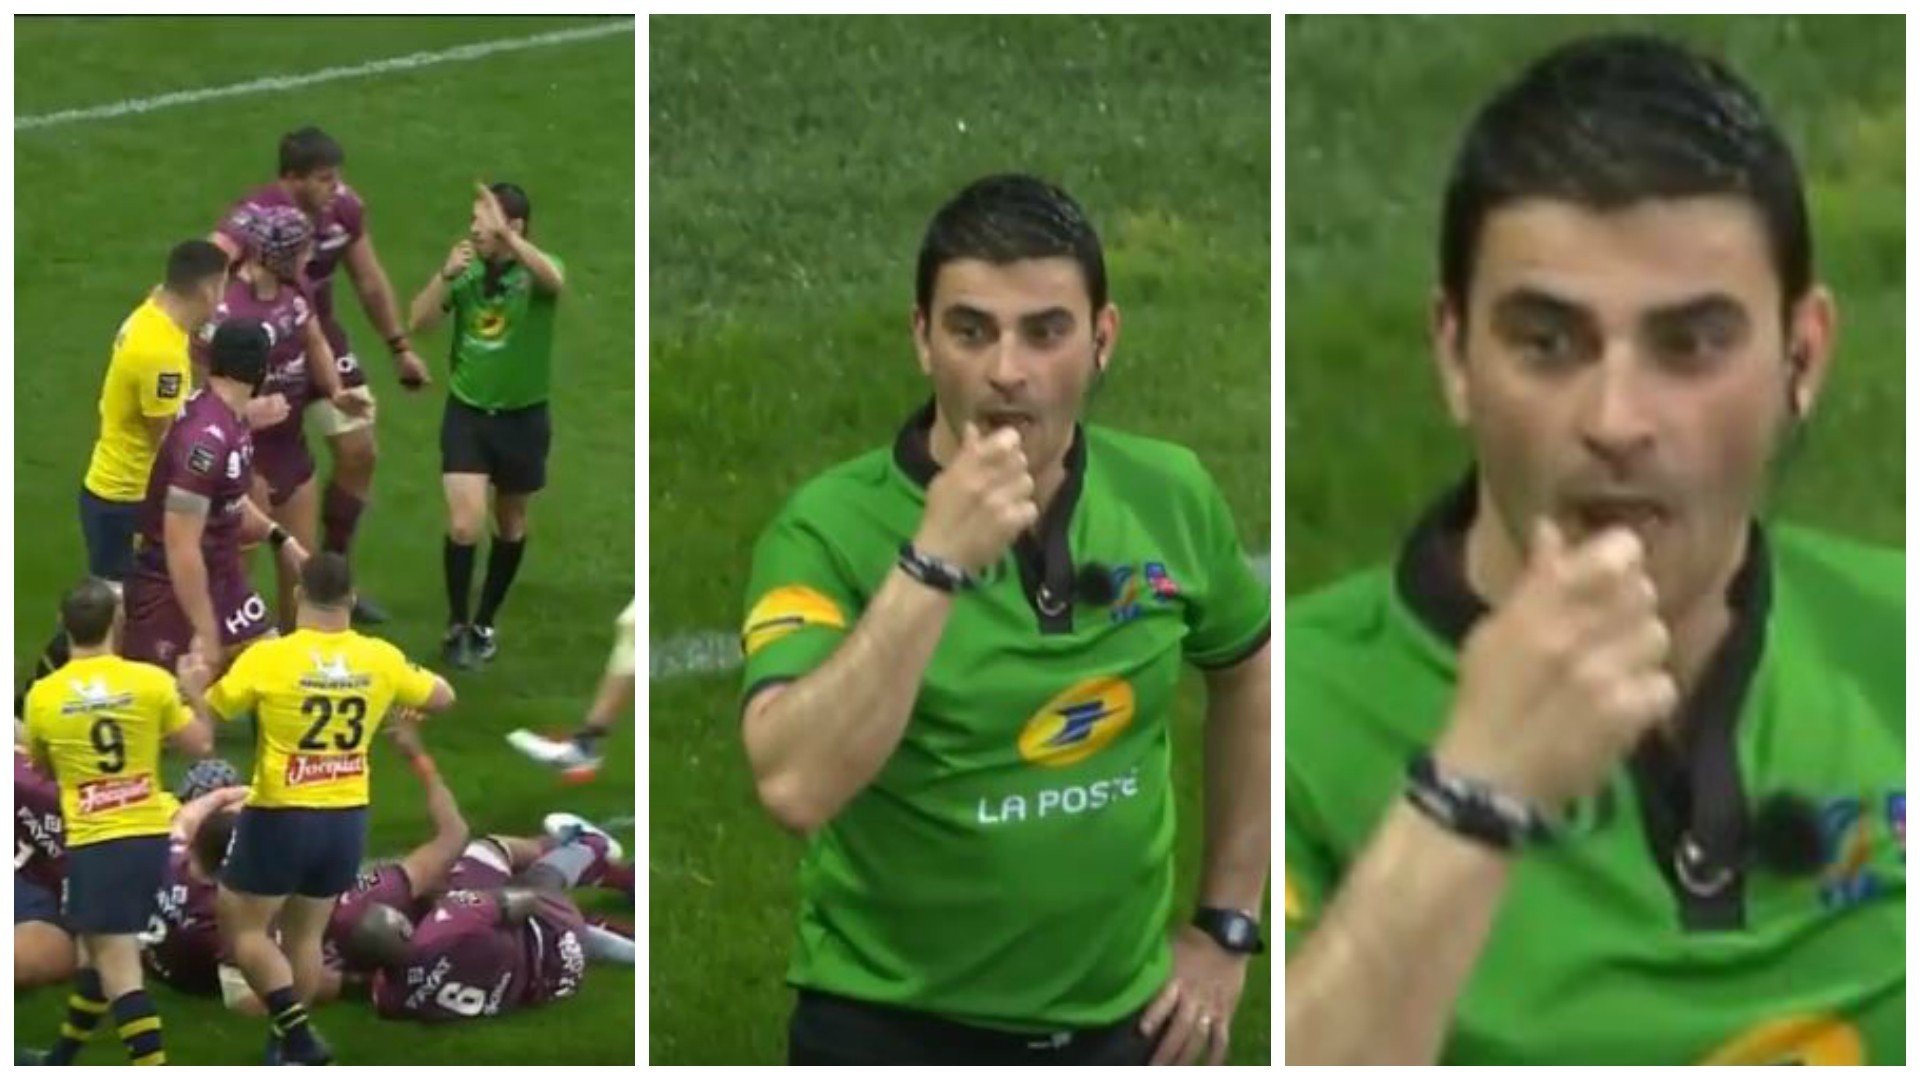 This remarkable TMO decision proves that rugby is NOT getting soft...in France at least